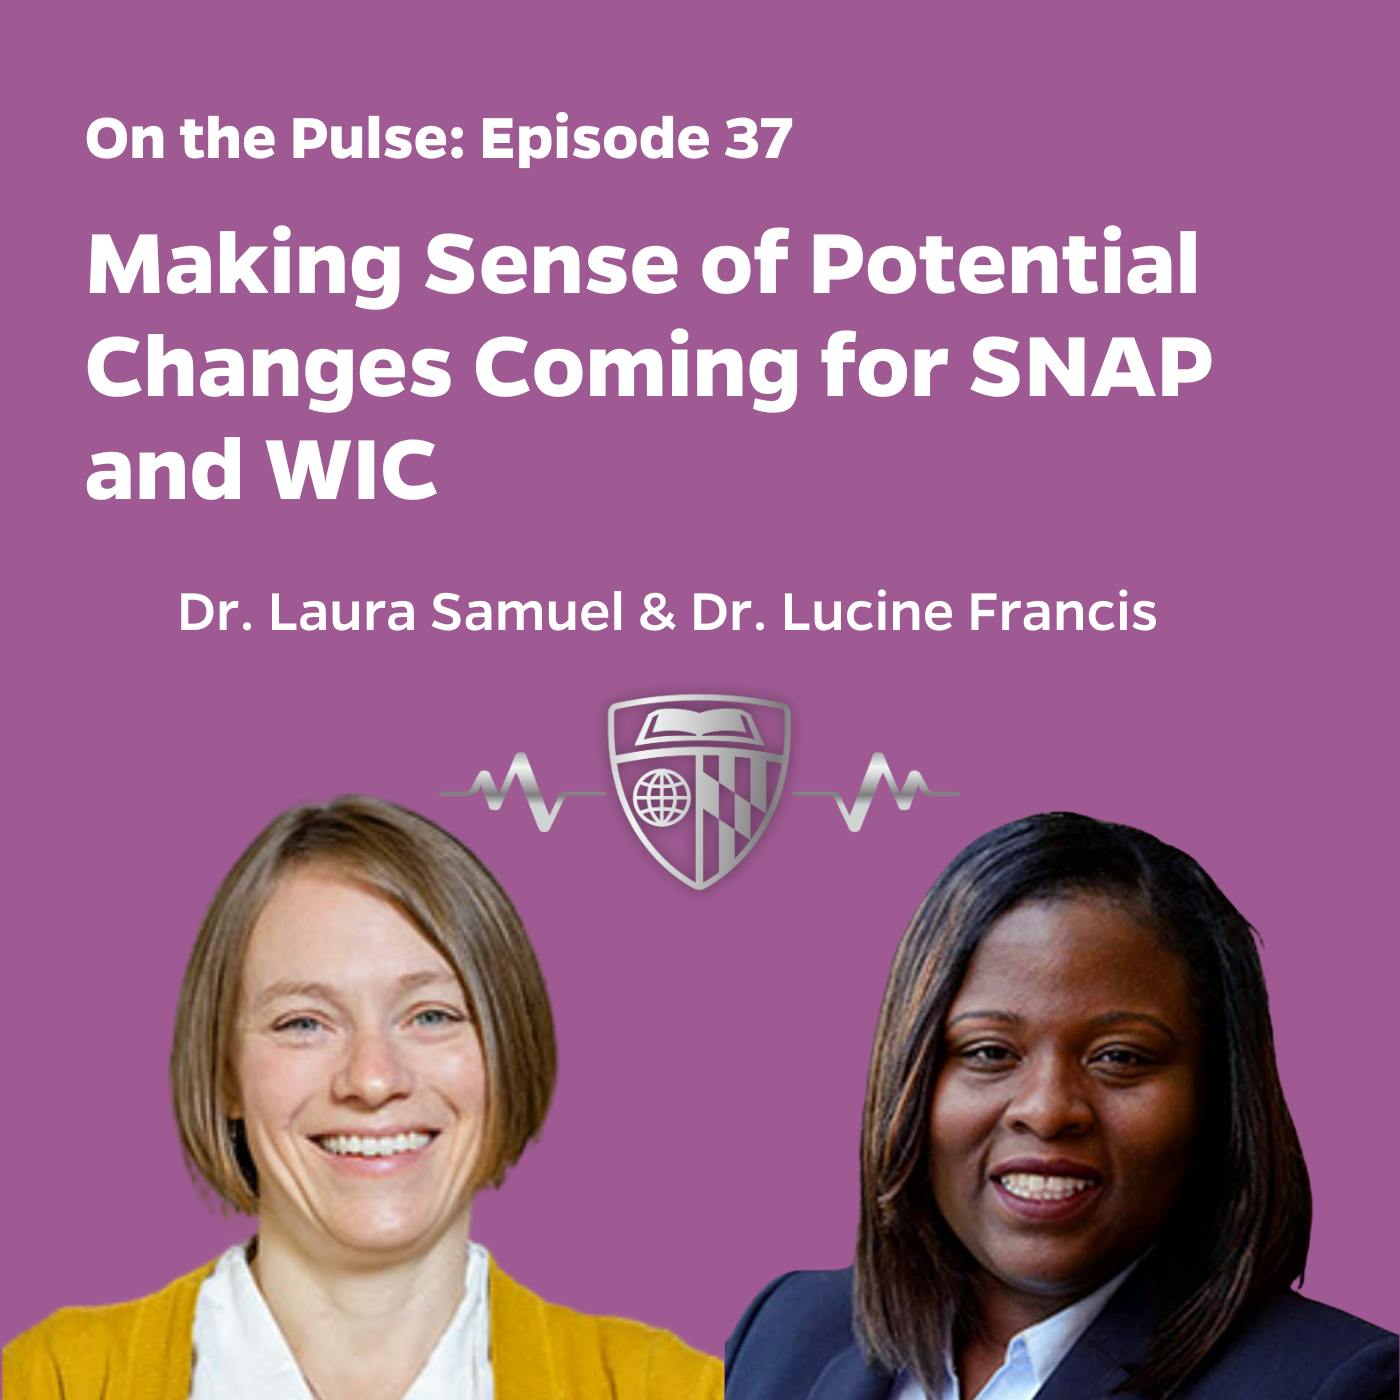 Episode 37: Making Sense of Potential Changes Coming for SNAP and WIC